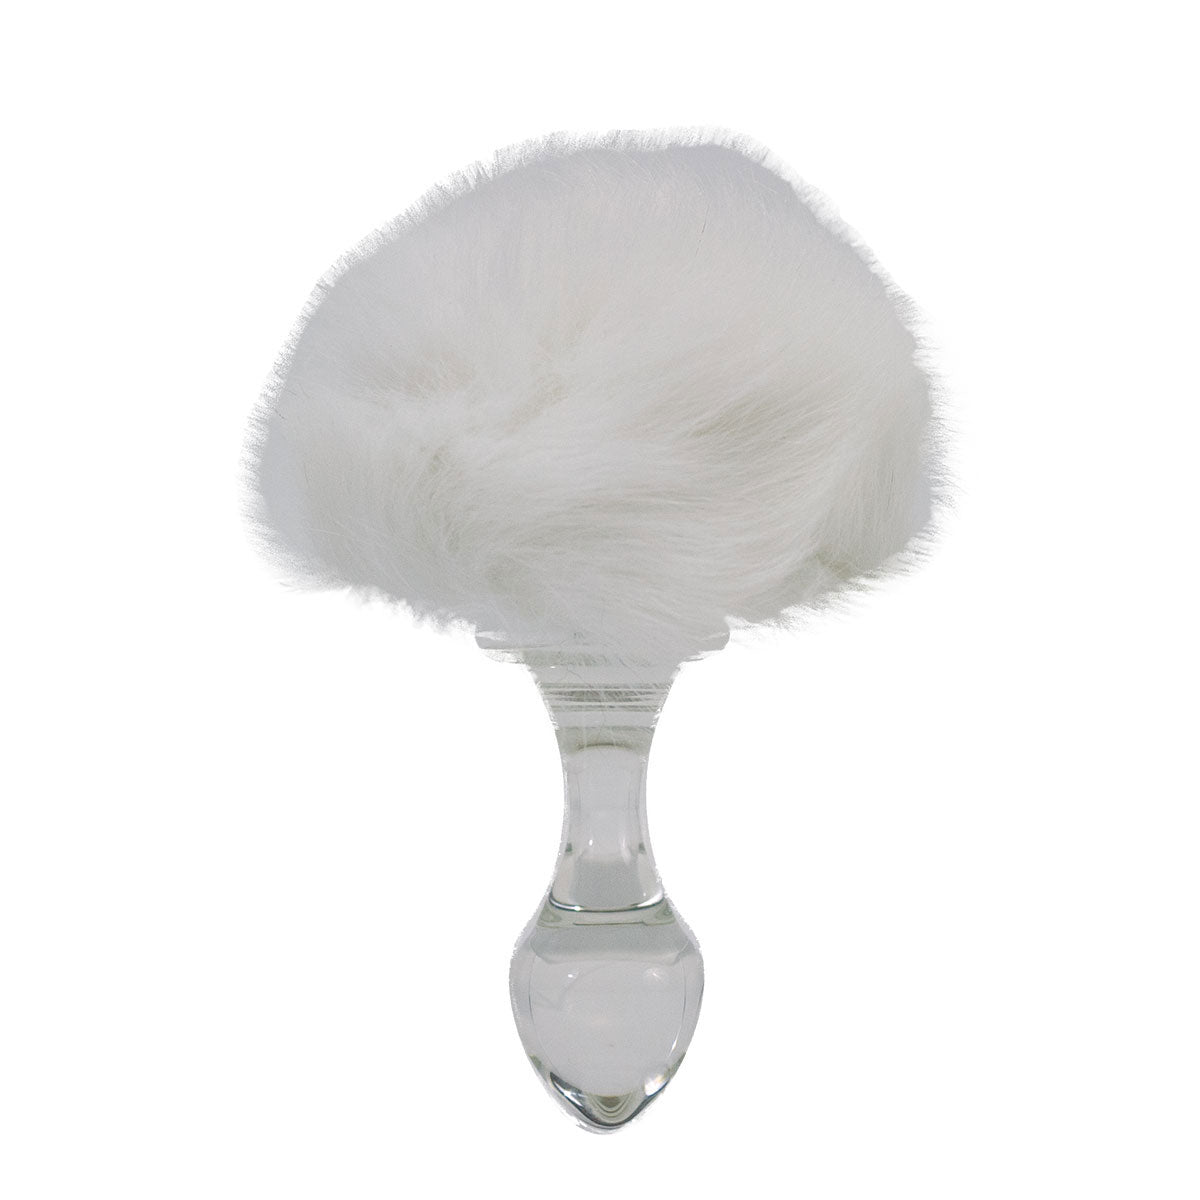 Crystal Delights Bunny Tail Magnetic Butt Plug Pink